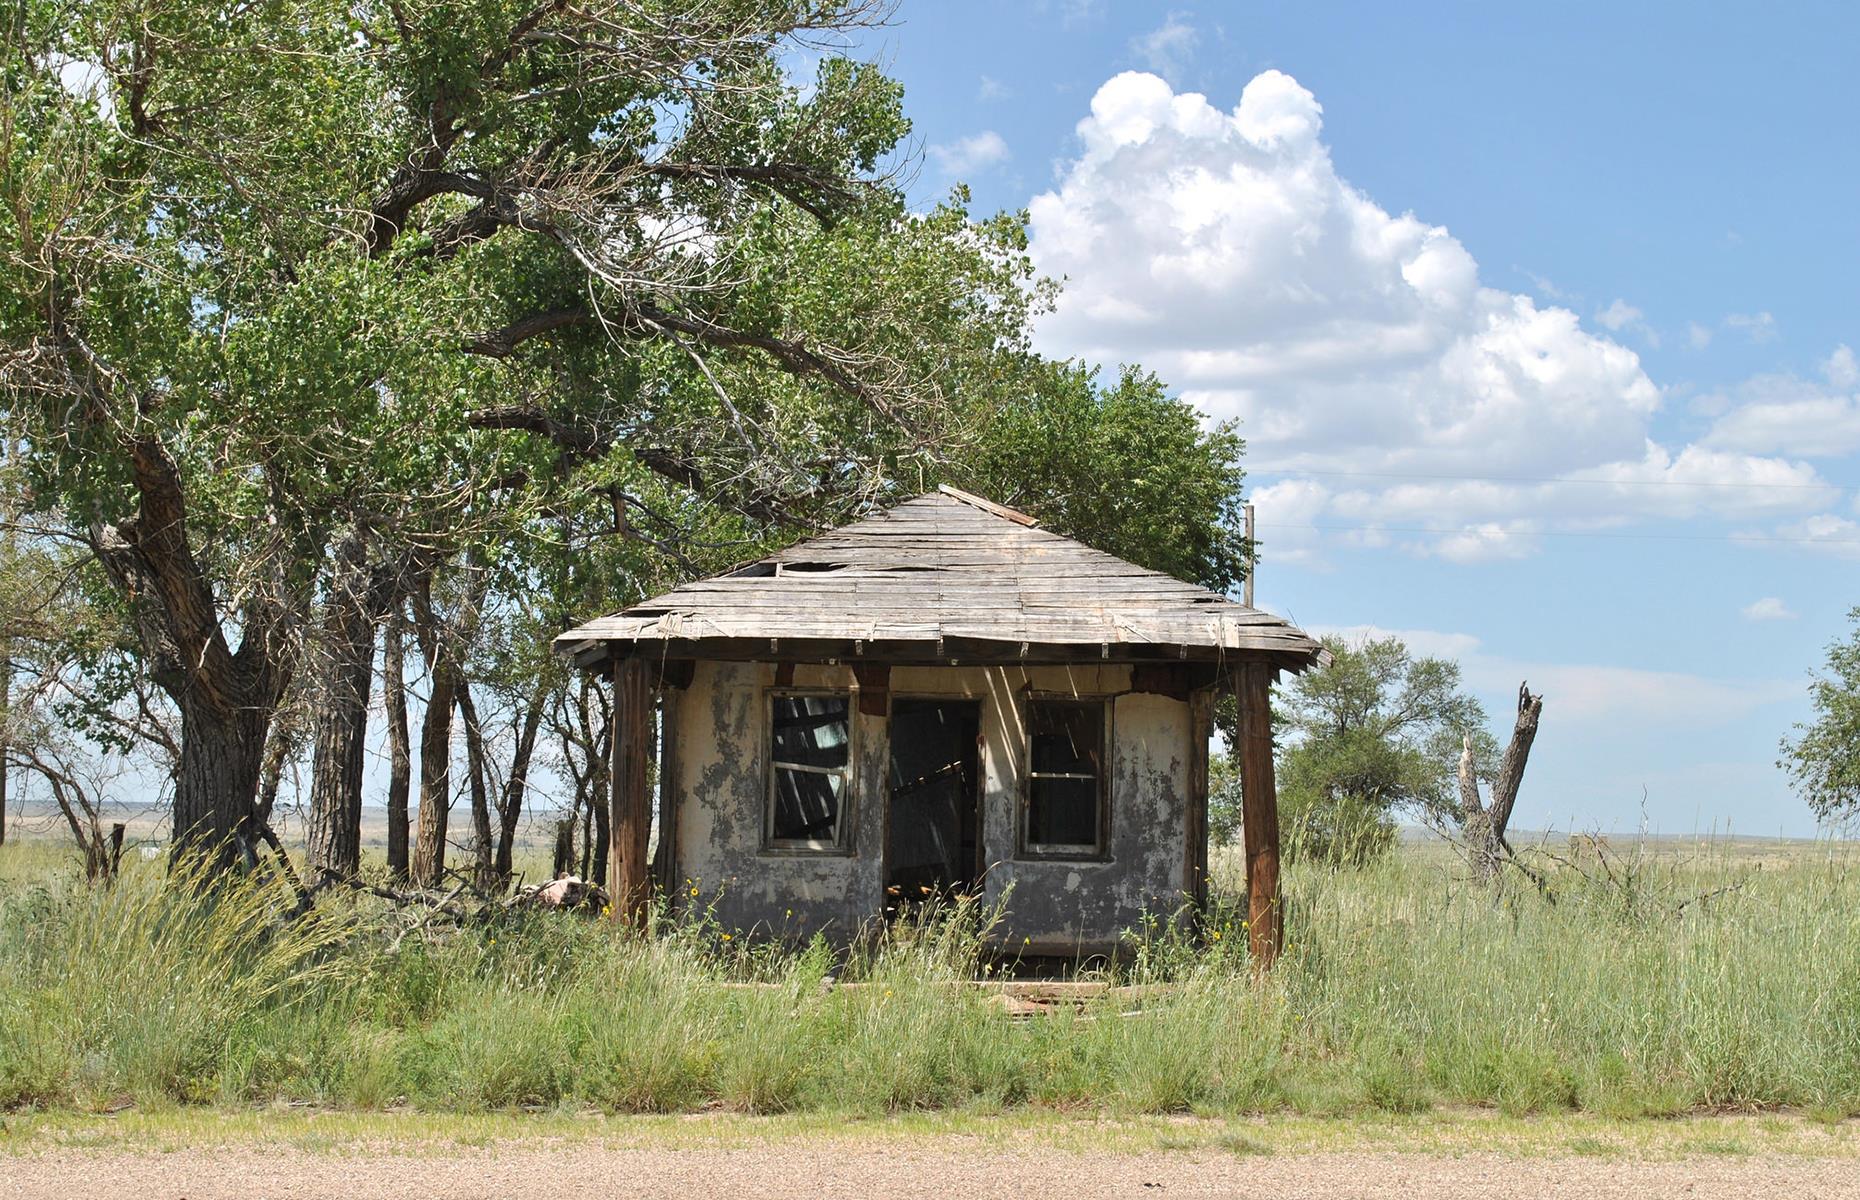 <p>All that remains now of the once-booming spot are 17 time-warp buildings untouched for decades and the old Route 66 roadbed. An evocative location harking back to America's mid-century heyday, the remarkable ghost town was listed in the National Register of Historic Places in 2007. </p>